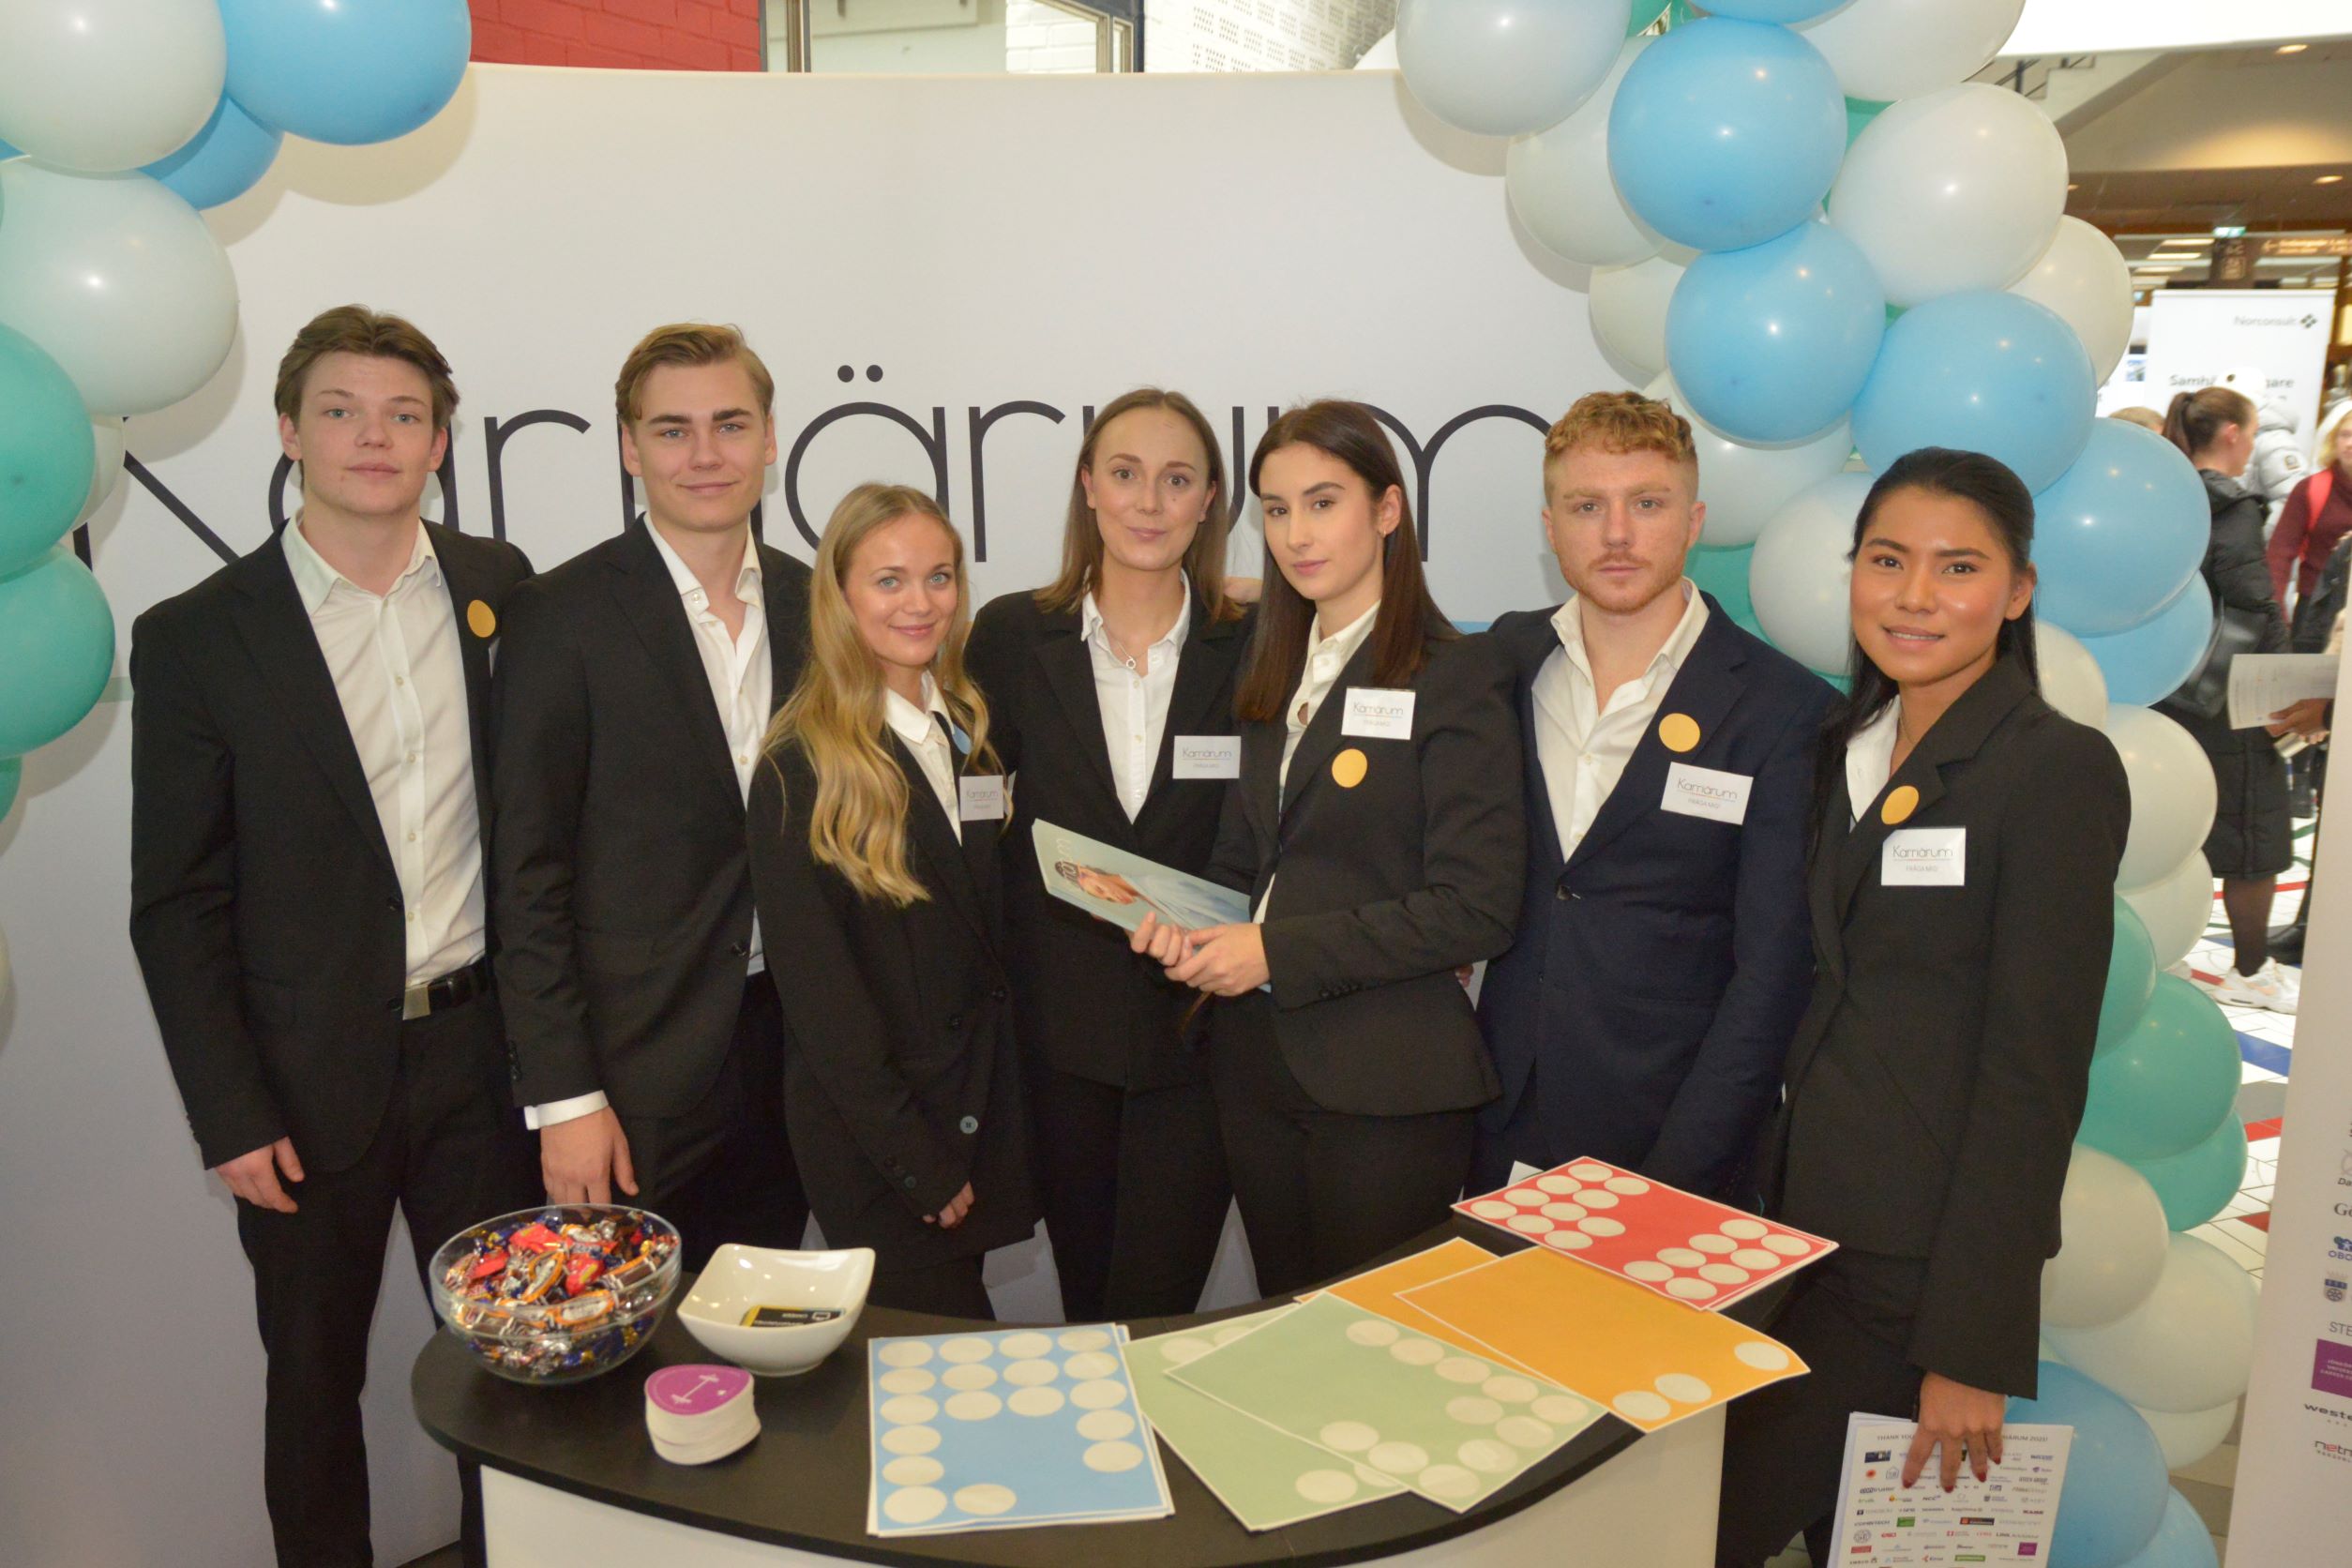 JTH students who helped the visitors to the career day Karriärum with information.